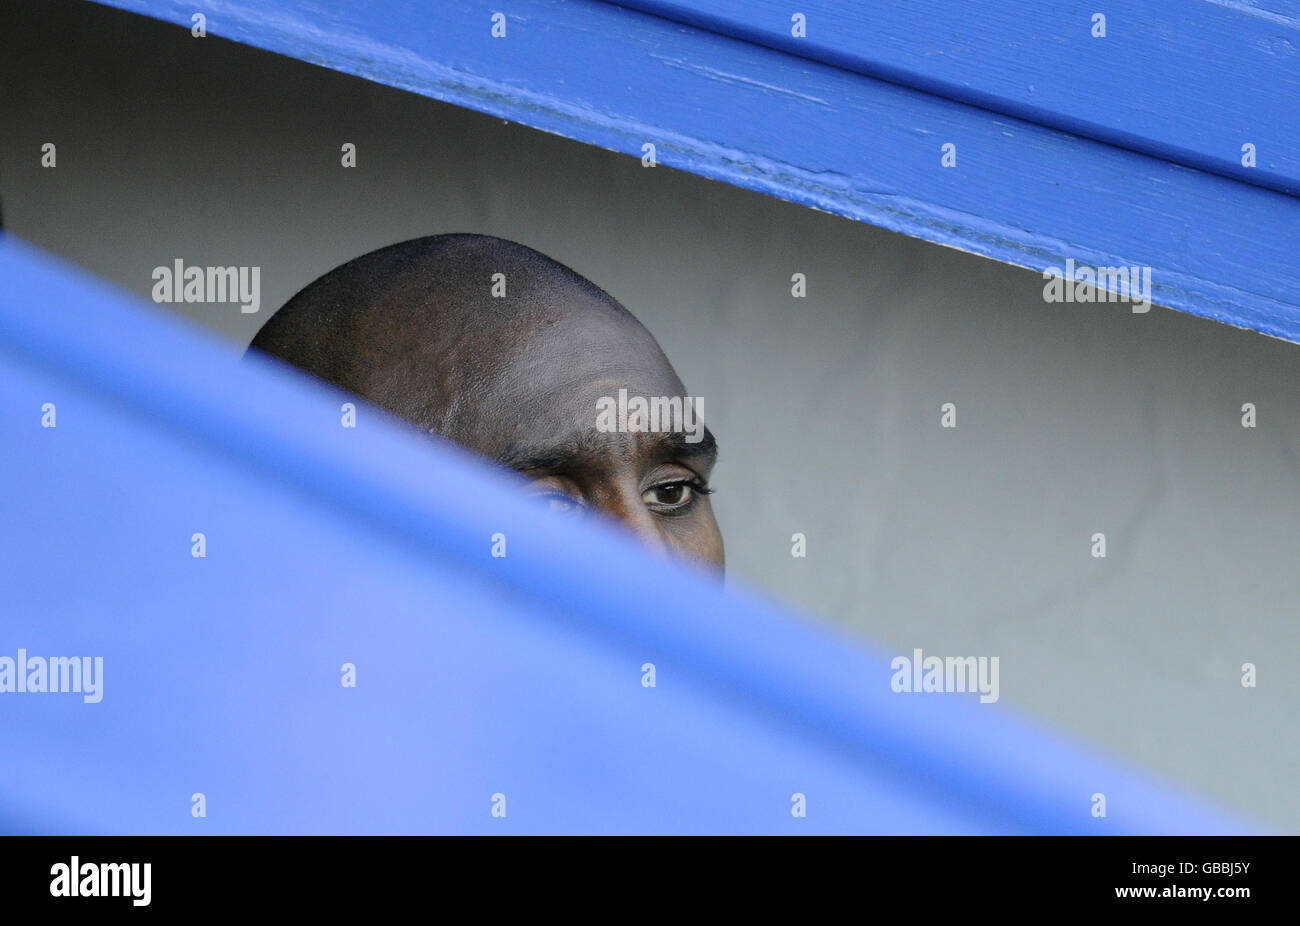 Portsmouth captain Sol Campbell is just visible in the tunnel as he waits to come on to the pitch at the start of the game prior to the FA Cup Third Round match at Fratton Park, Portsmouth. Stock Photo